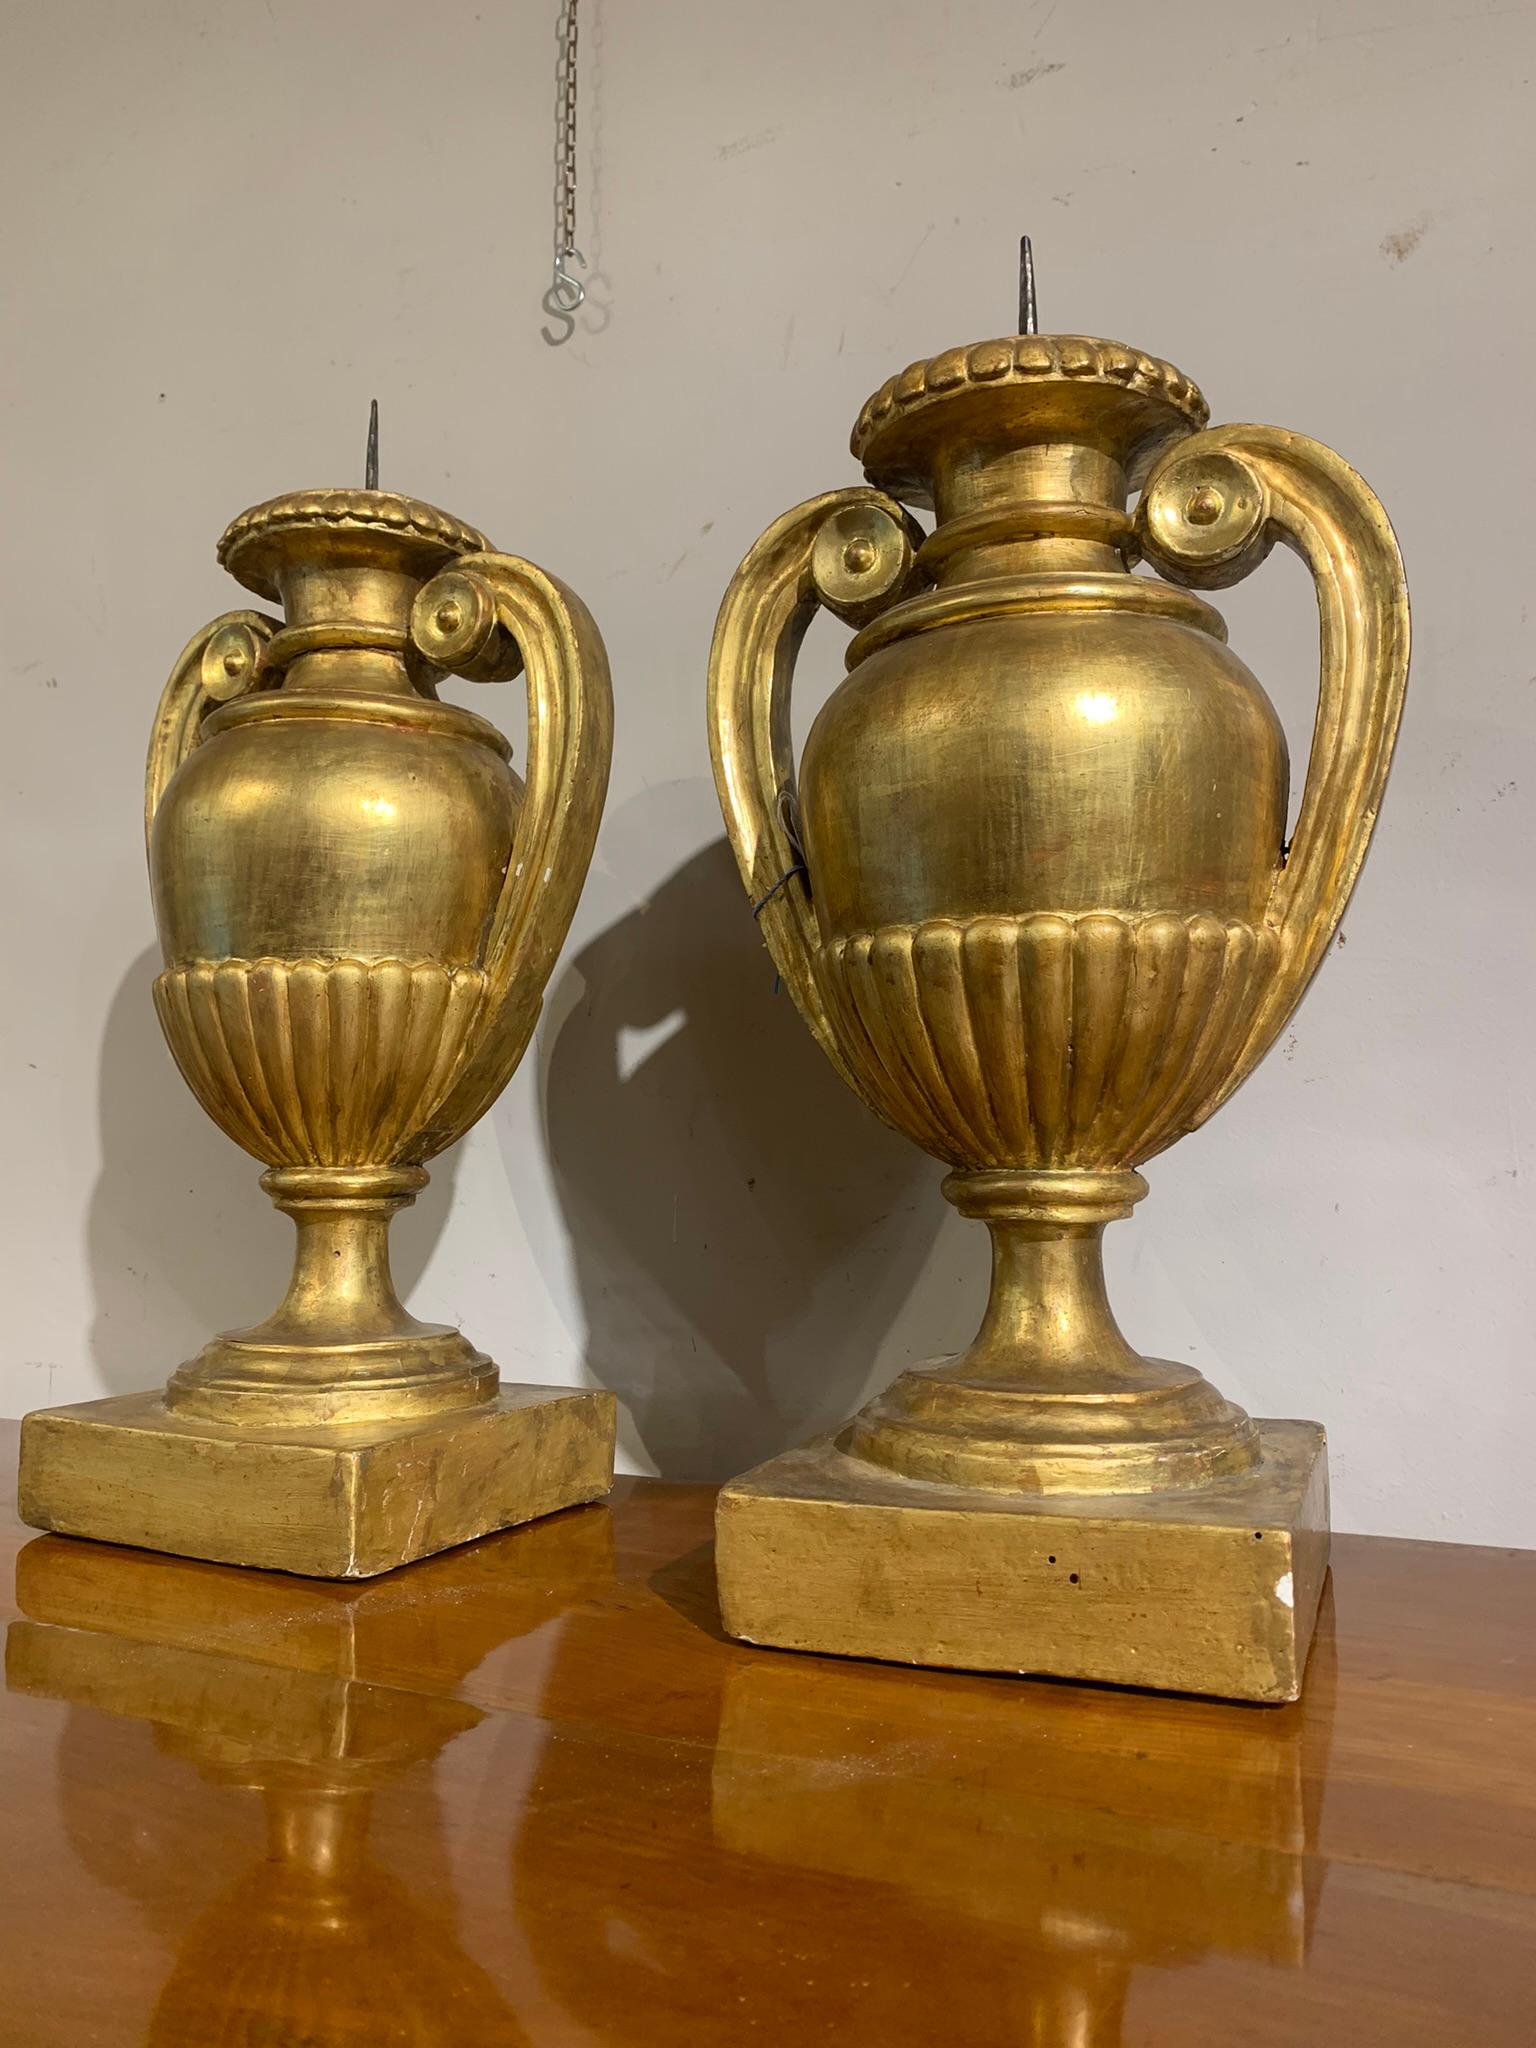 Pair of candlesticks for one light in carved pine wood and gilded with gold leaf. Classic shape of the empire style amphora with curly grips.
Centerpiece candlesticks, also suitable for creating splendid lampshades.